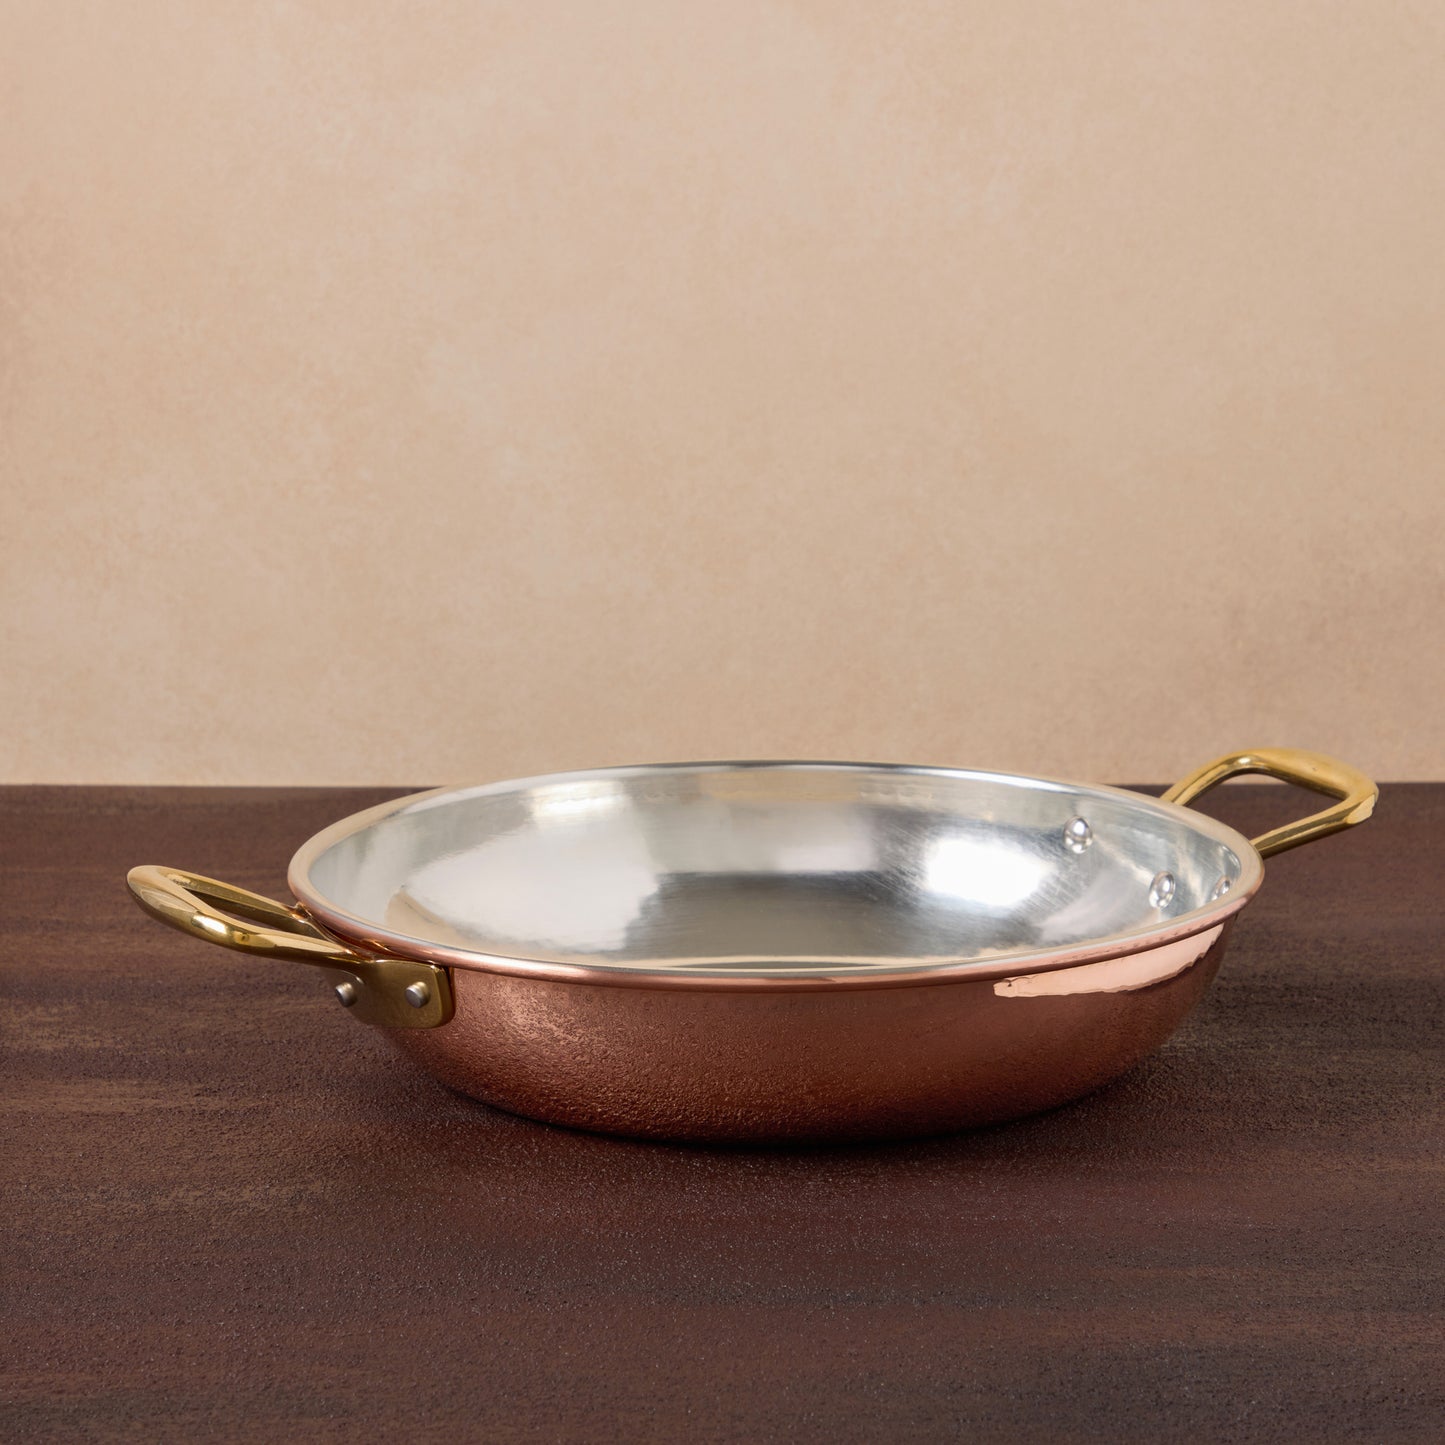 A classic with a twist - Ruffoni copper frying pan with two side handles to ensure a convenient and elegant transition from stovetop to oven and tabletop. Explore timeless craftsmanship now